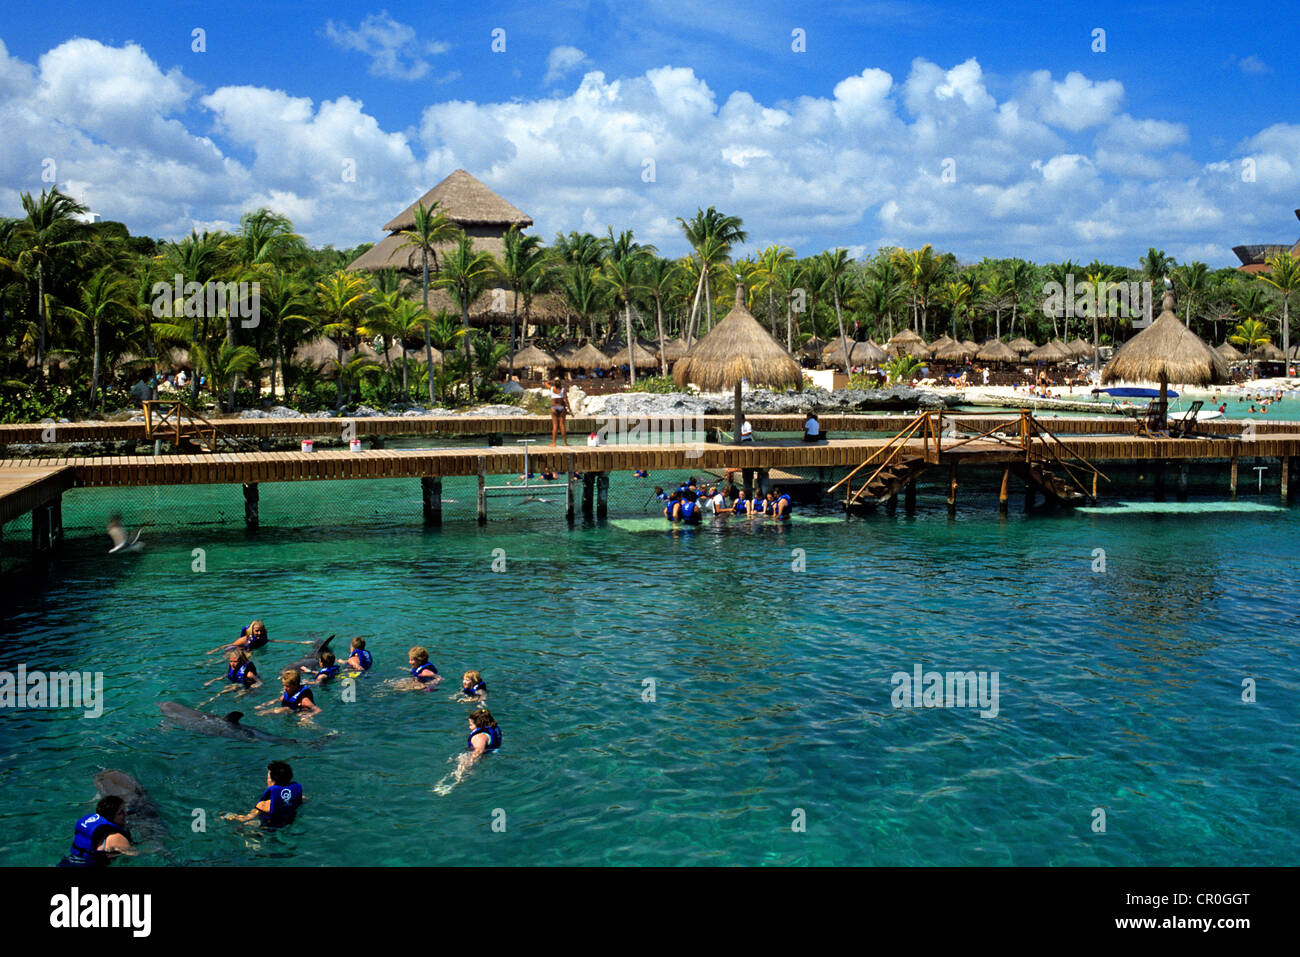 Mexico, Quintana Roo State, Riviera Maya, Xcaret Cancun Eco Park, bassin for dolphins Stock Photo